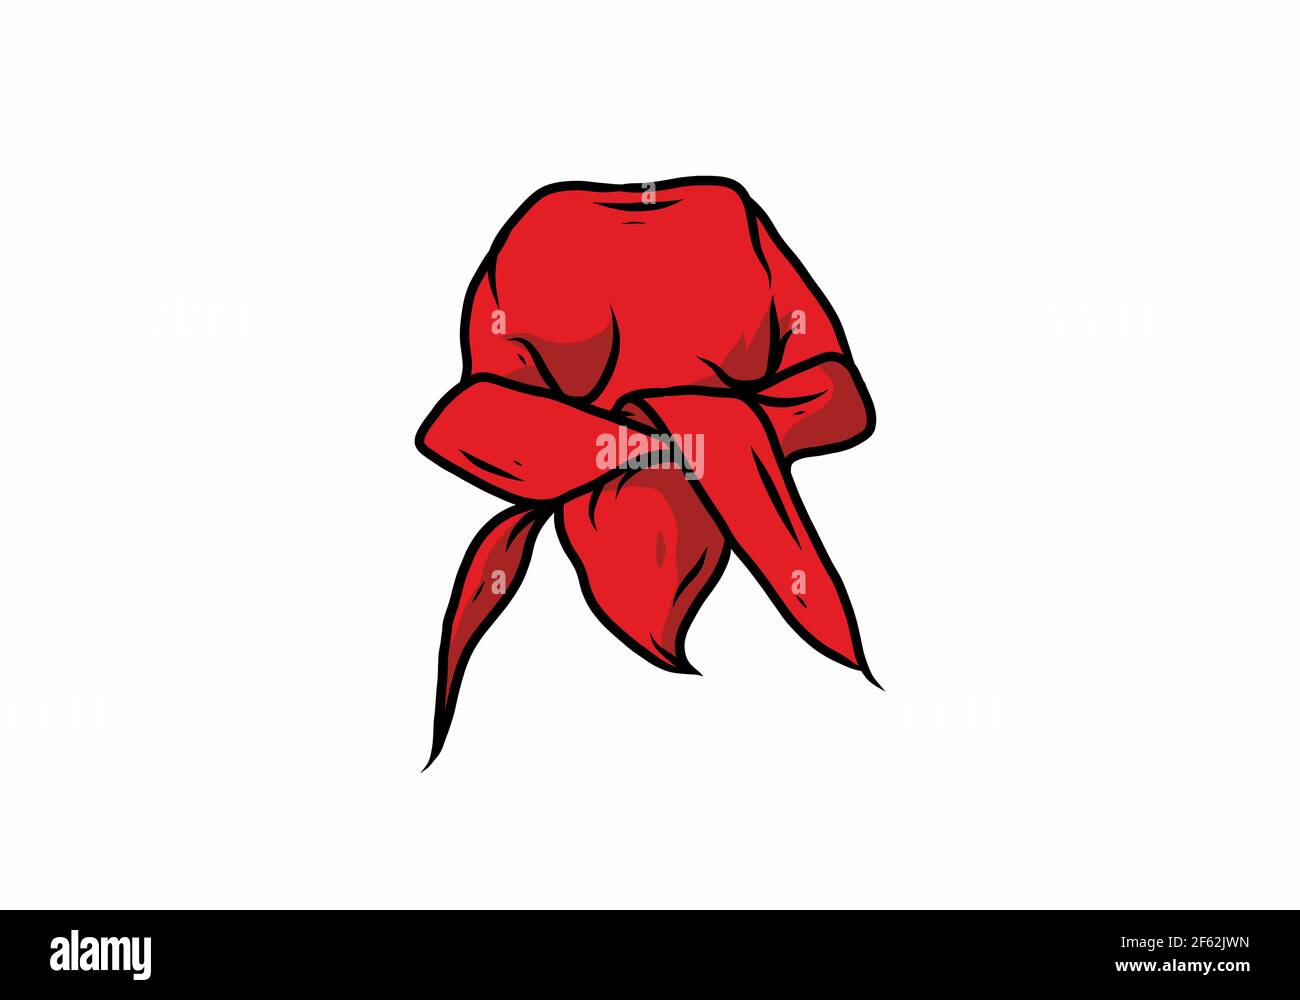 Red color of durag drawing illustration design Stock Vector